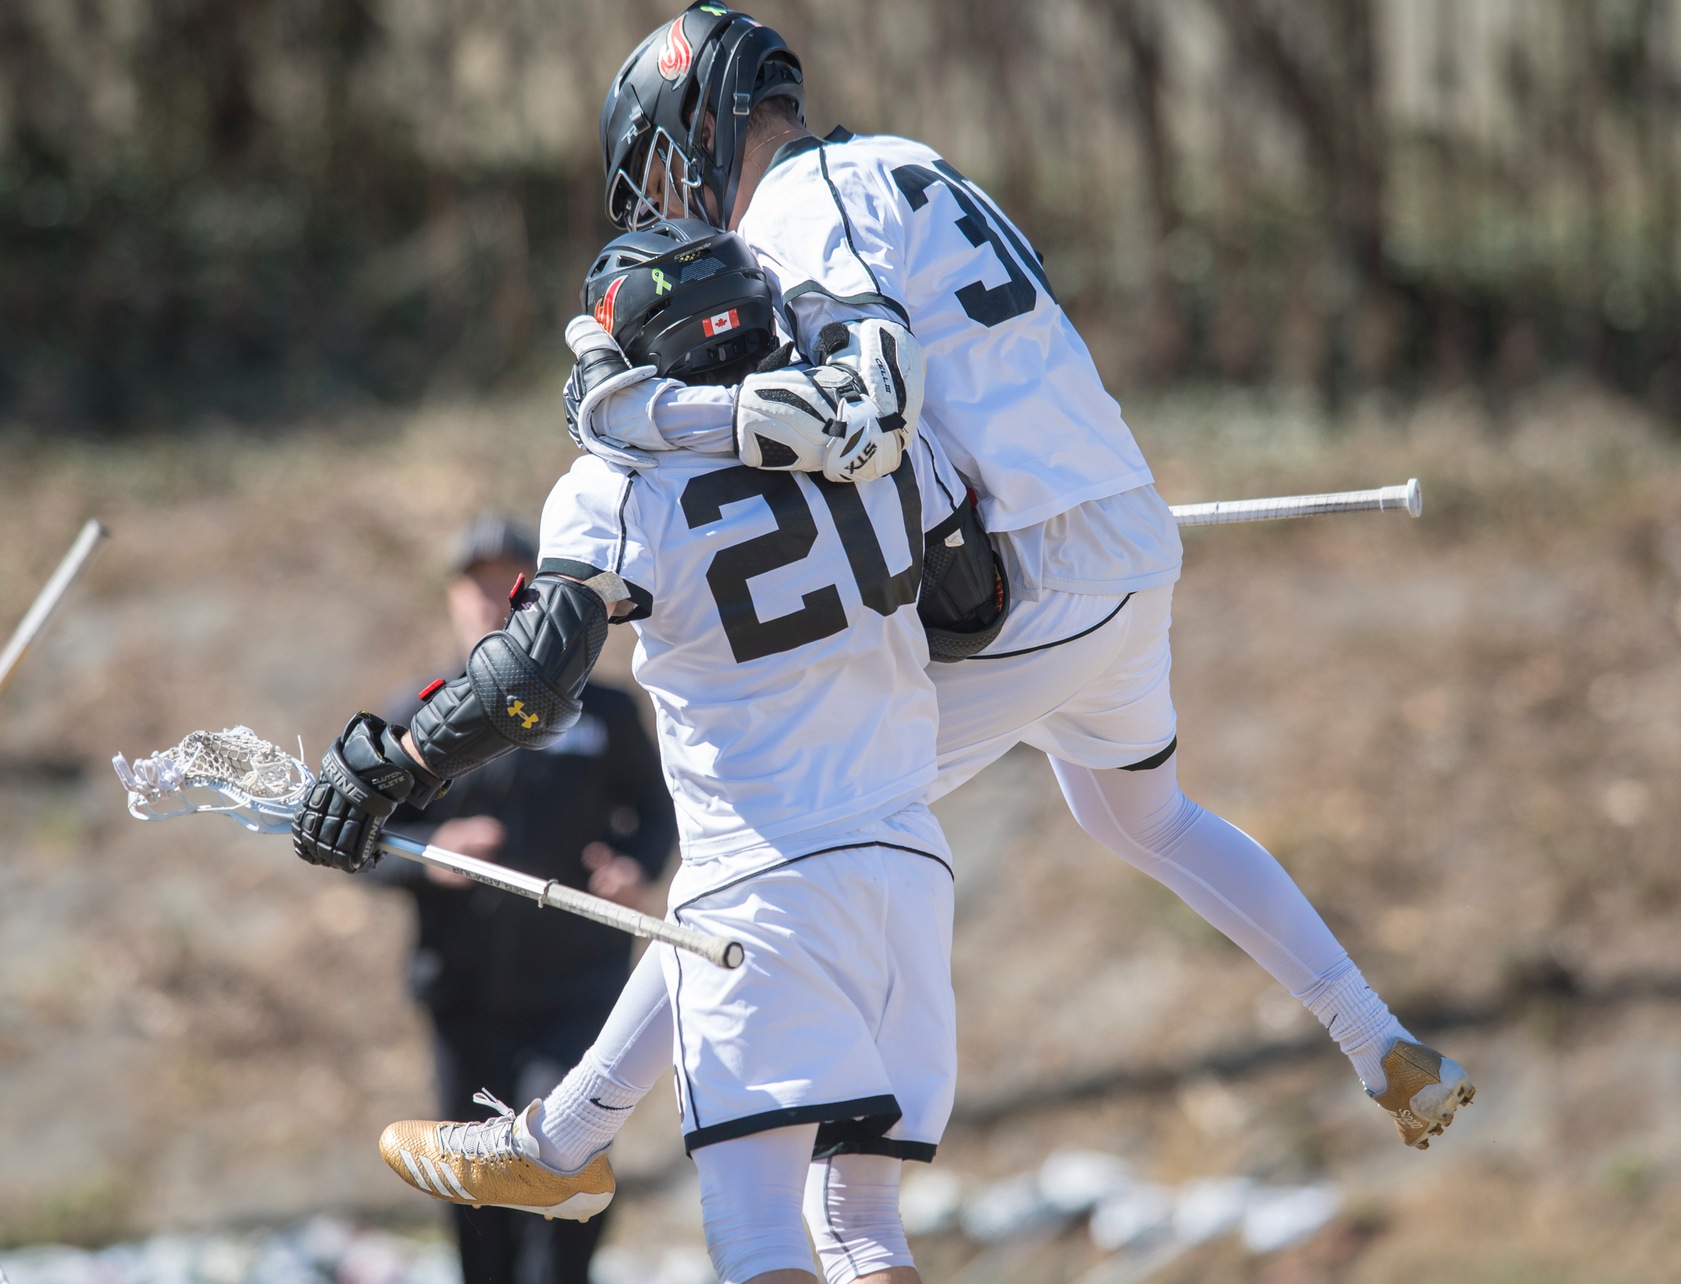 Tyler Mace Clutched Five goals and Six assists in Victory over Post University.